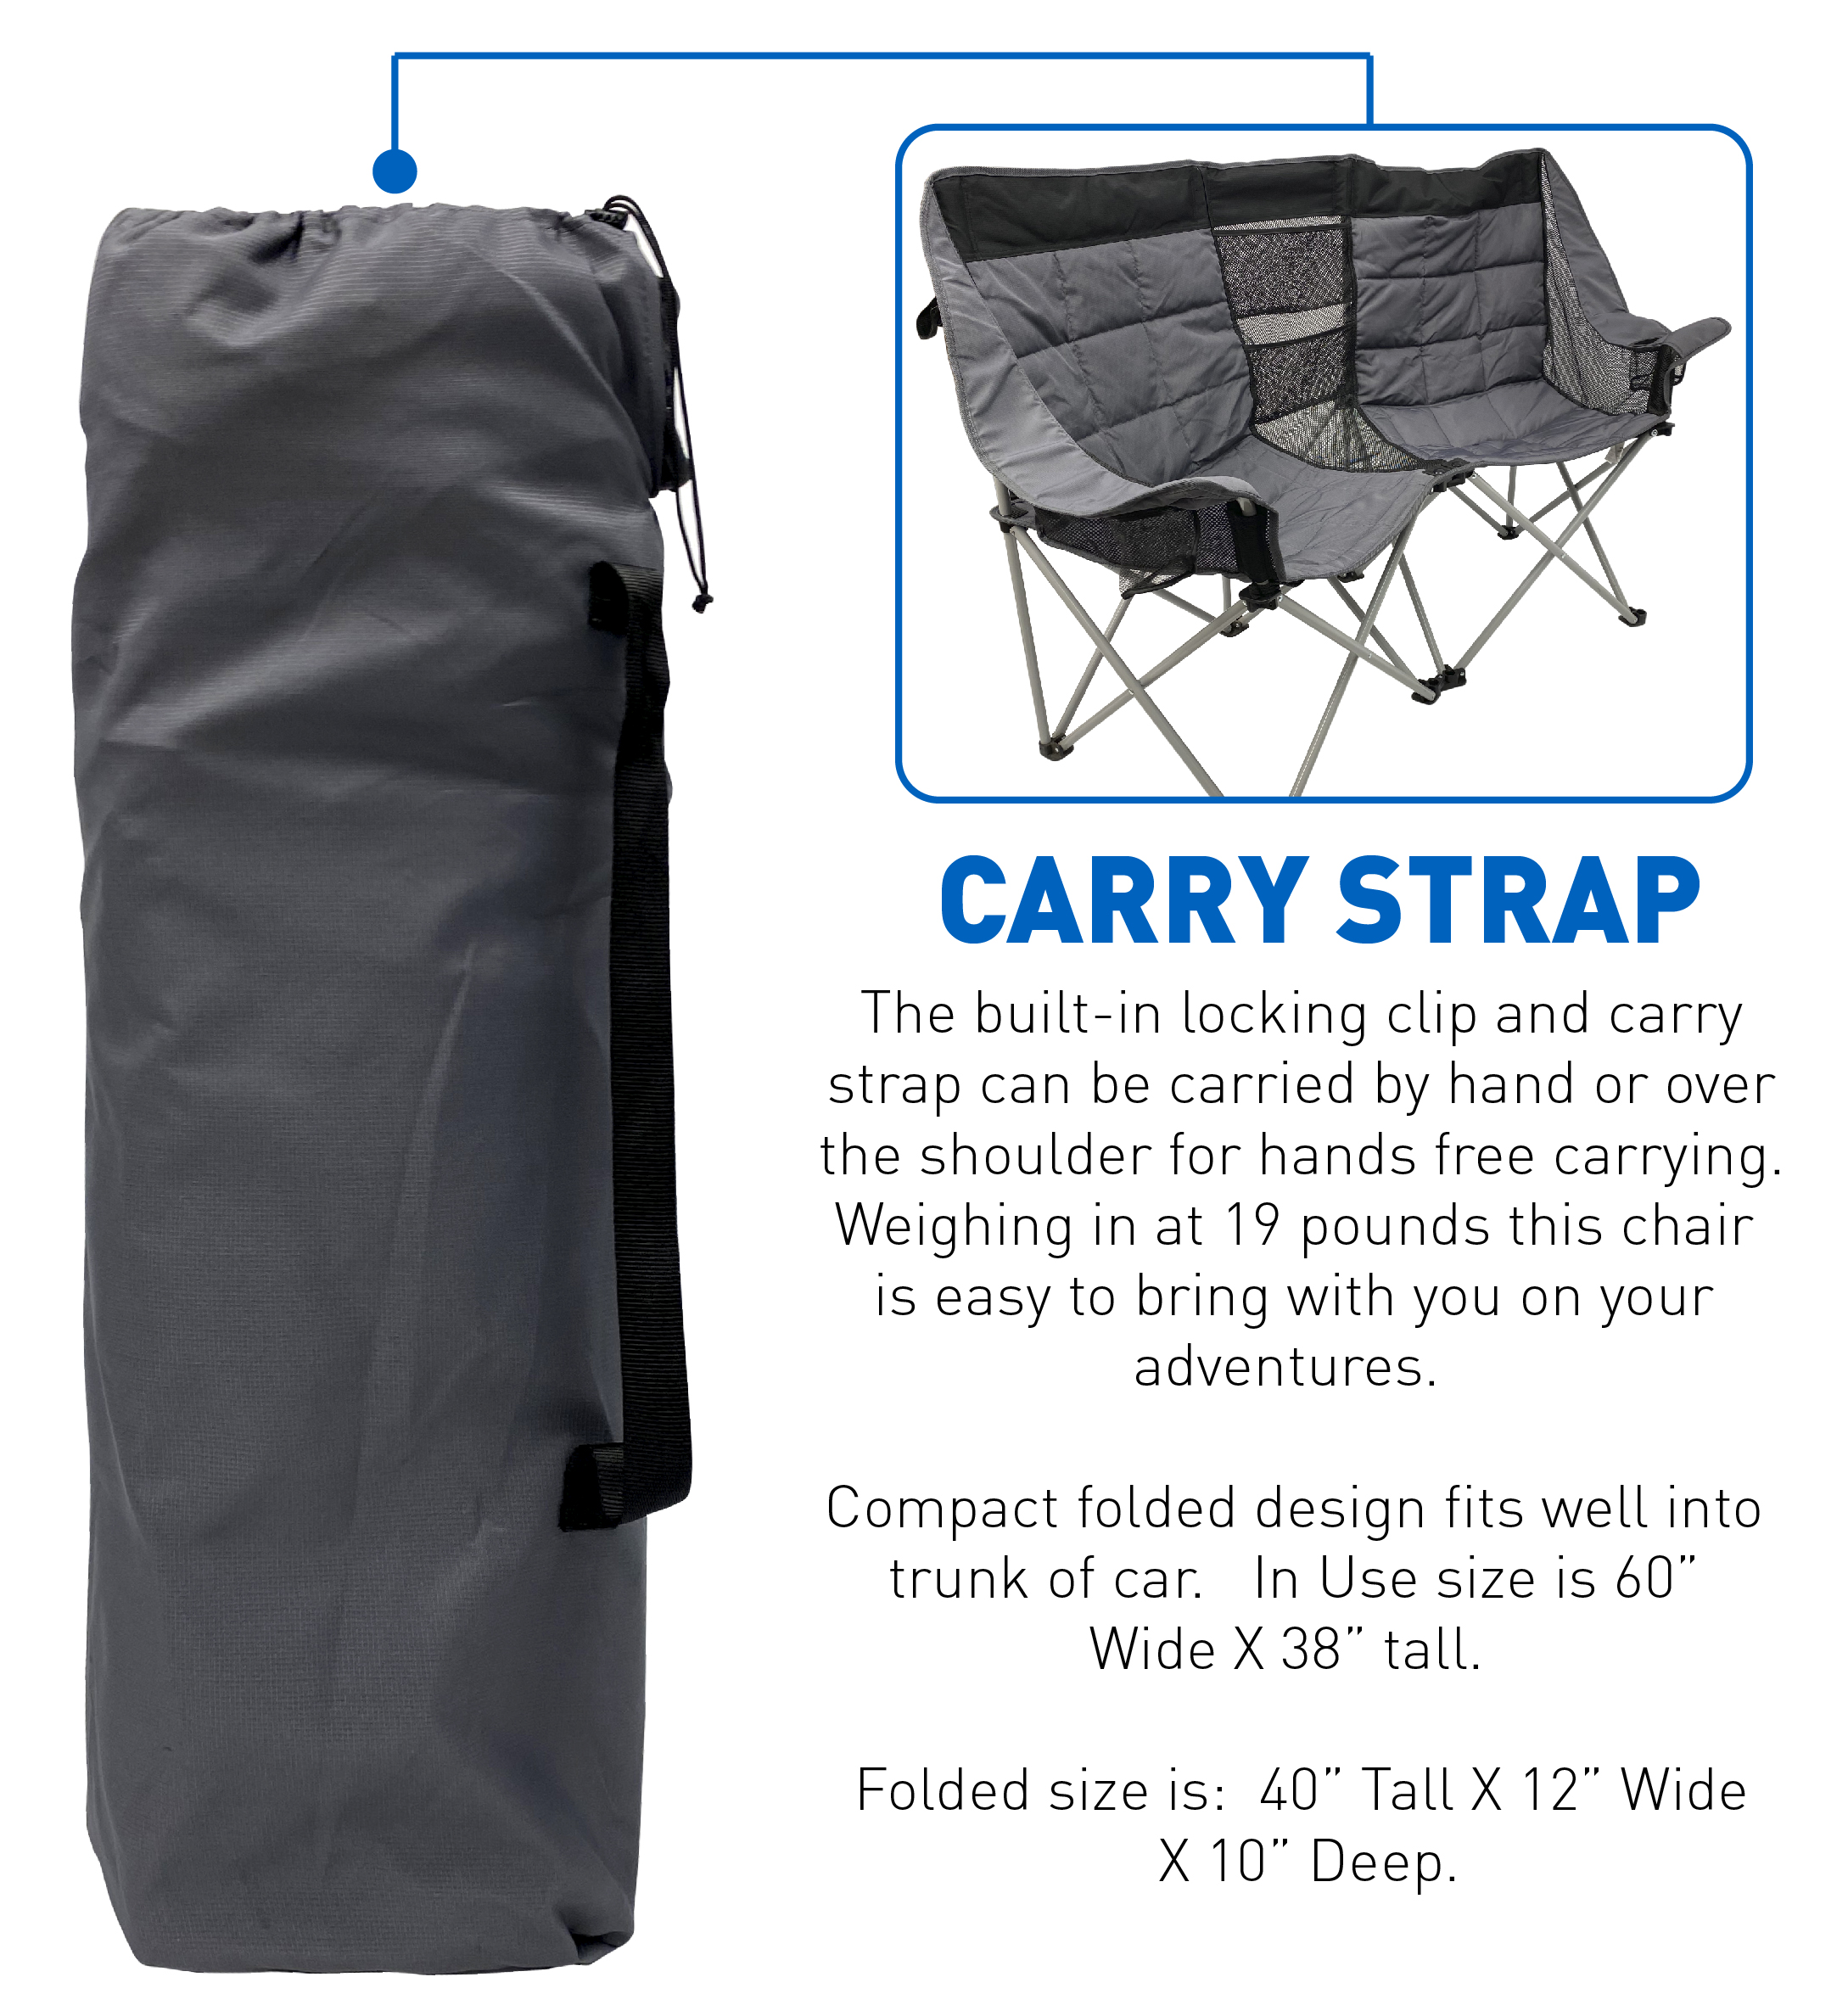 EasyGo Product Camping Chair - Double Love Seat - Heavy Duty Oversized Camping RV Chair Folds Easily and is Padded - Black Grey - image 3 of 5